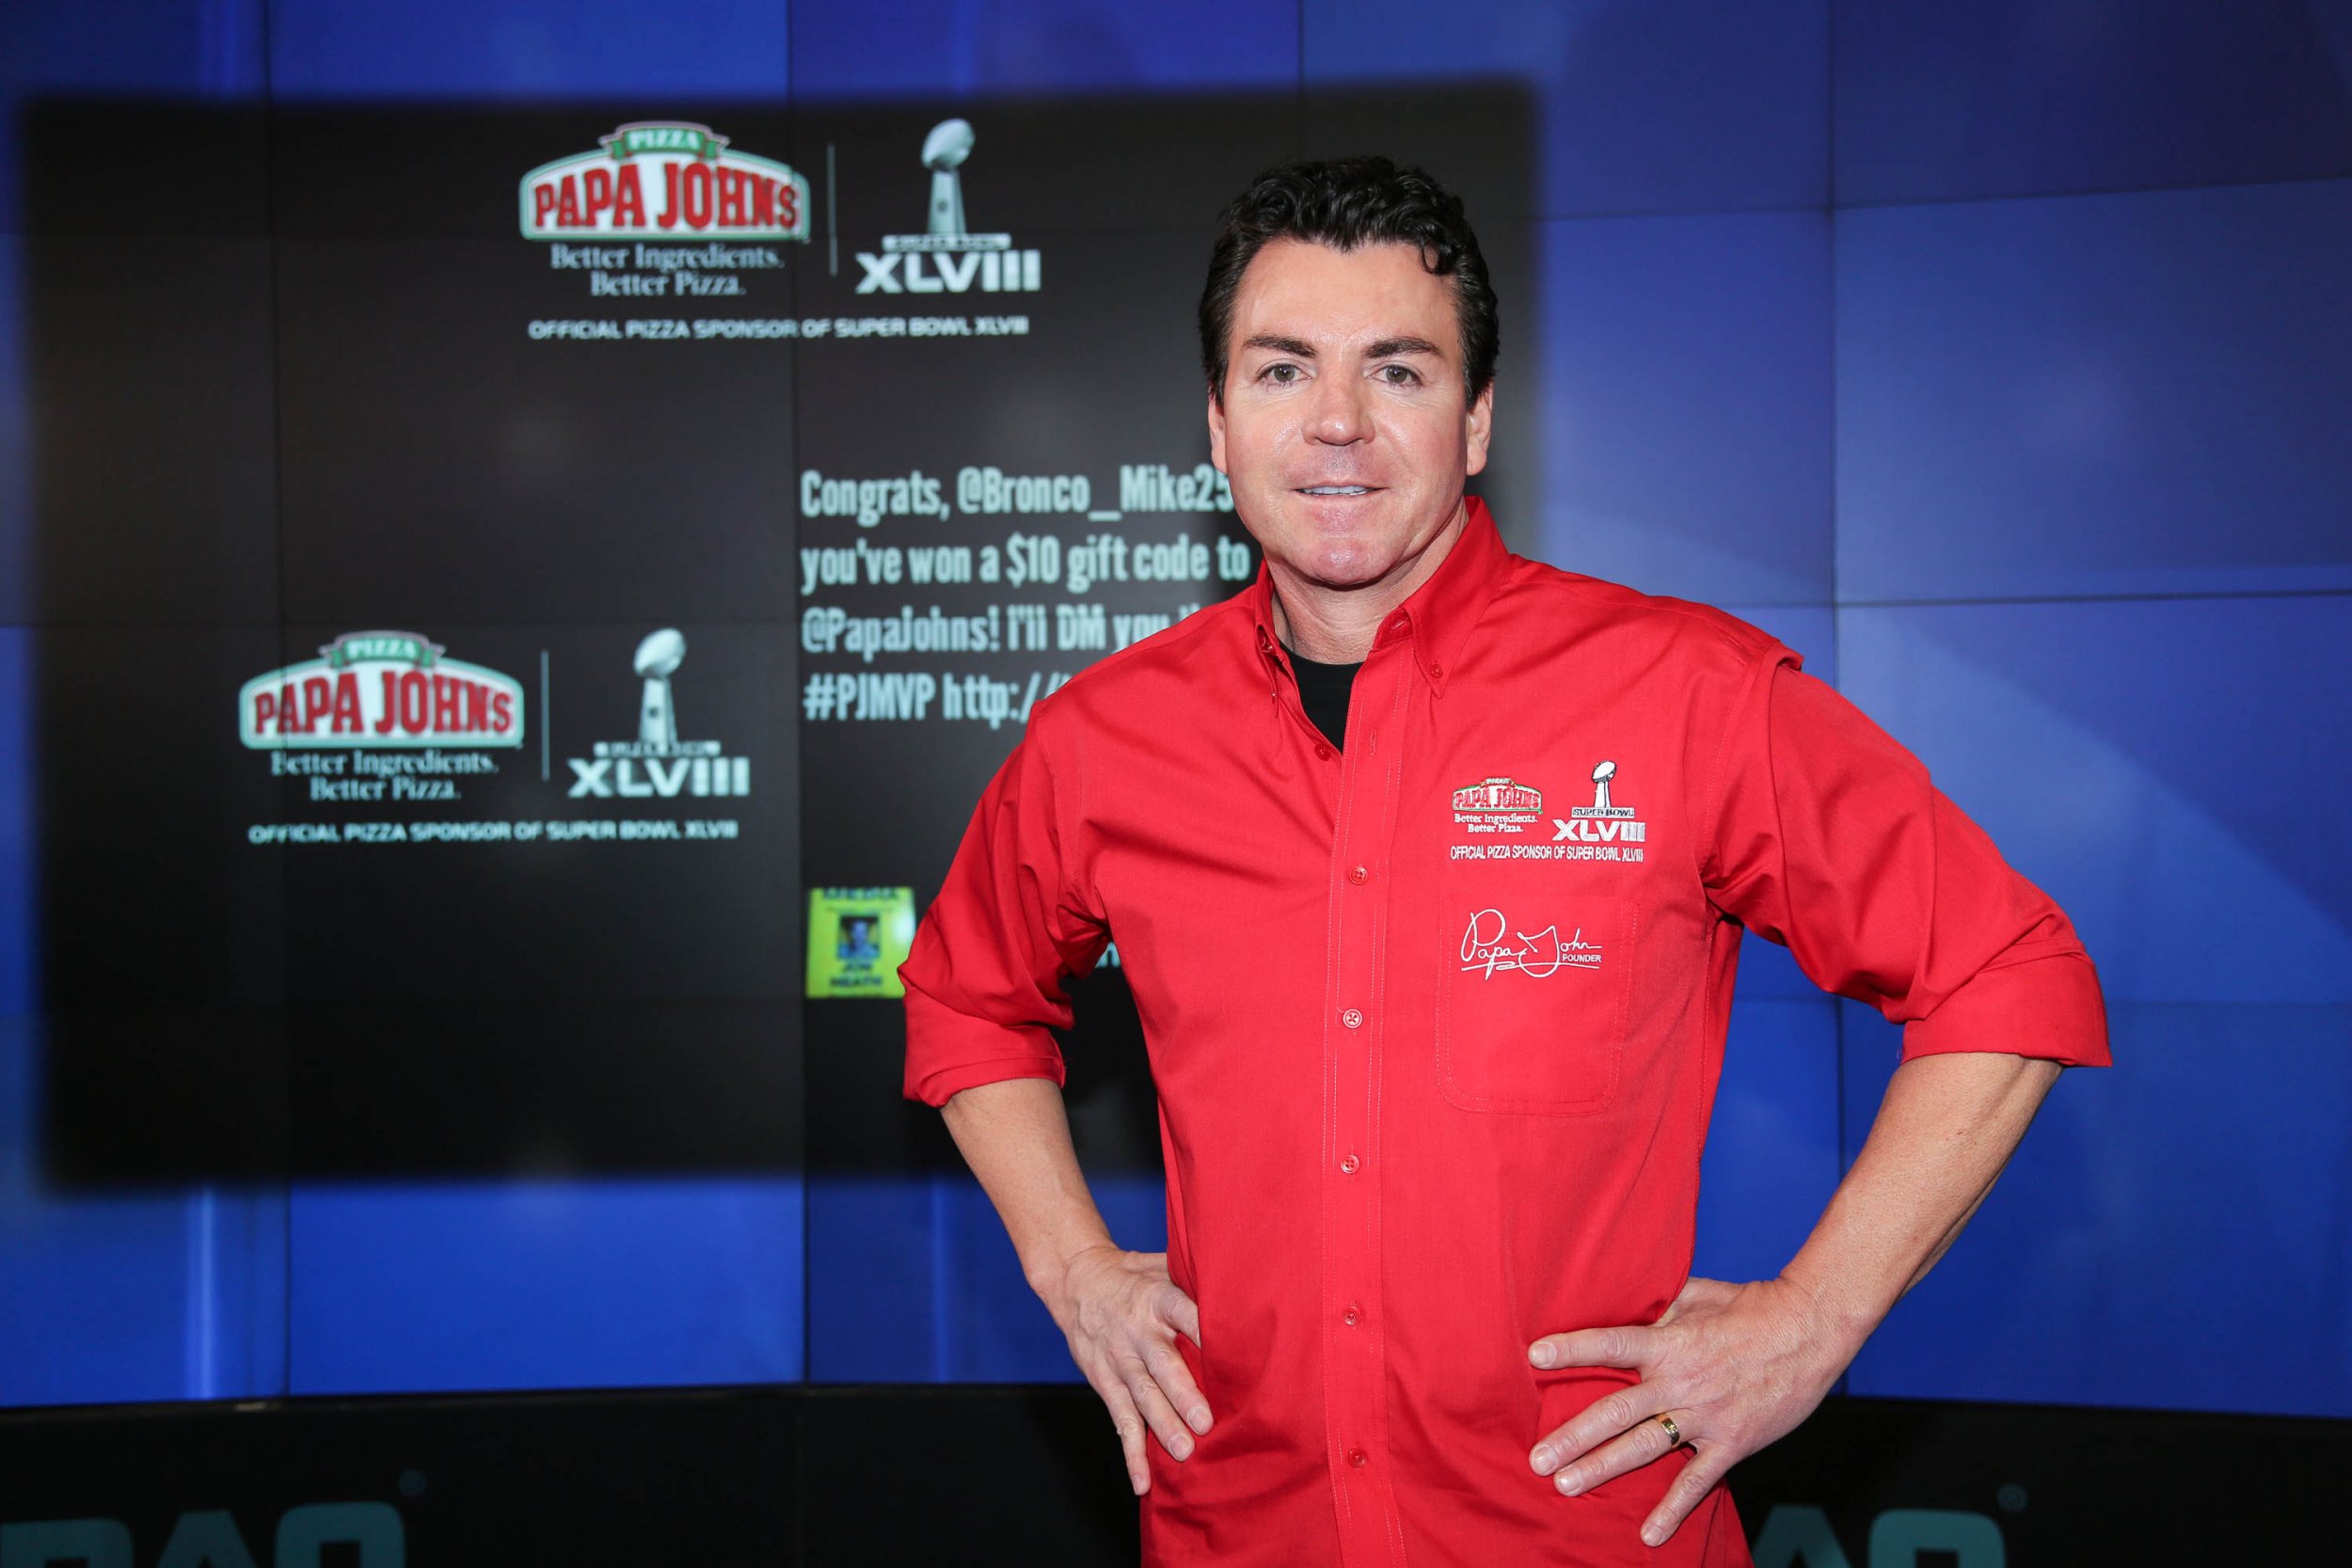 Two Knoxville Papa John's pizza makers to compete in Papa John's